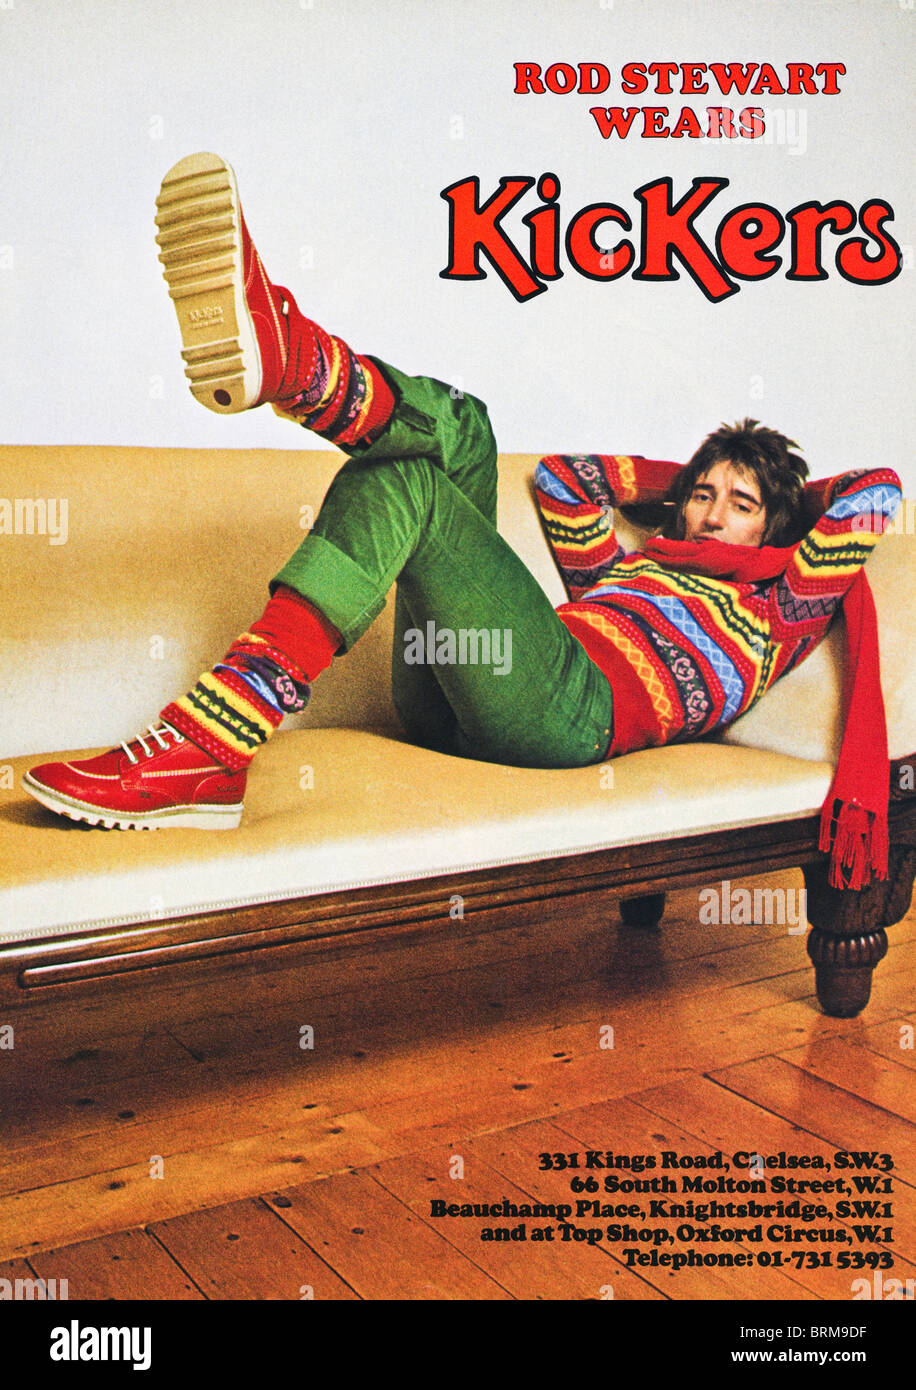 Singer Rod Stewart in an advert for Kickers boots in a fashion magazine circa 1977 Stock Photo